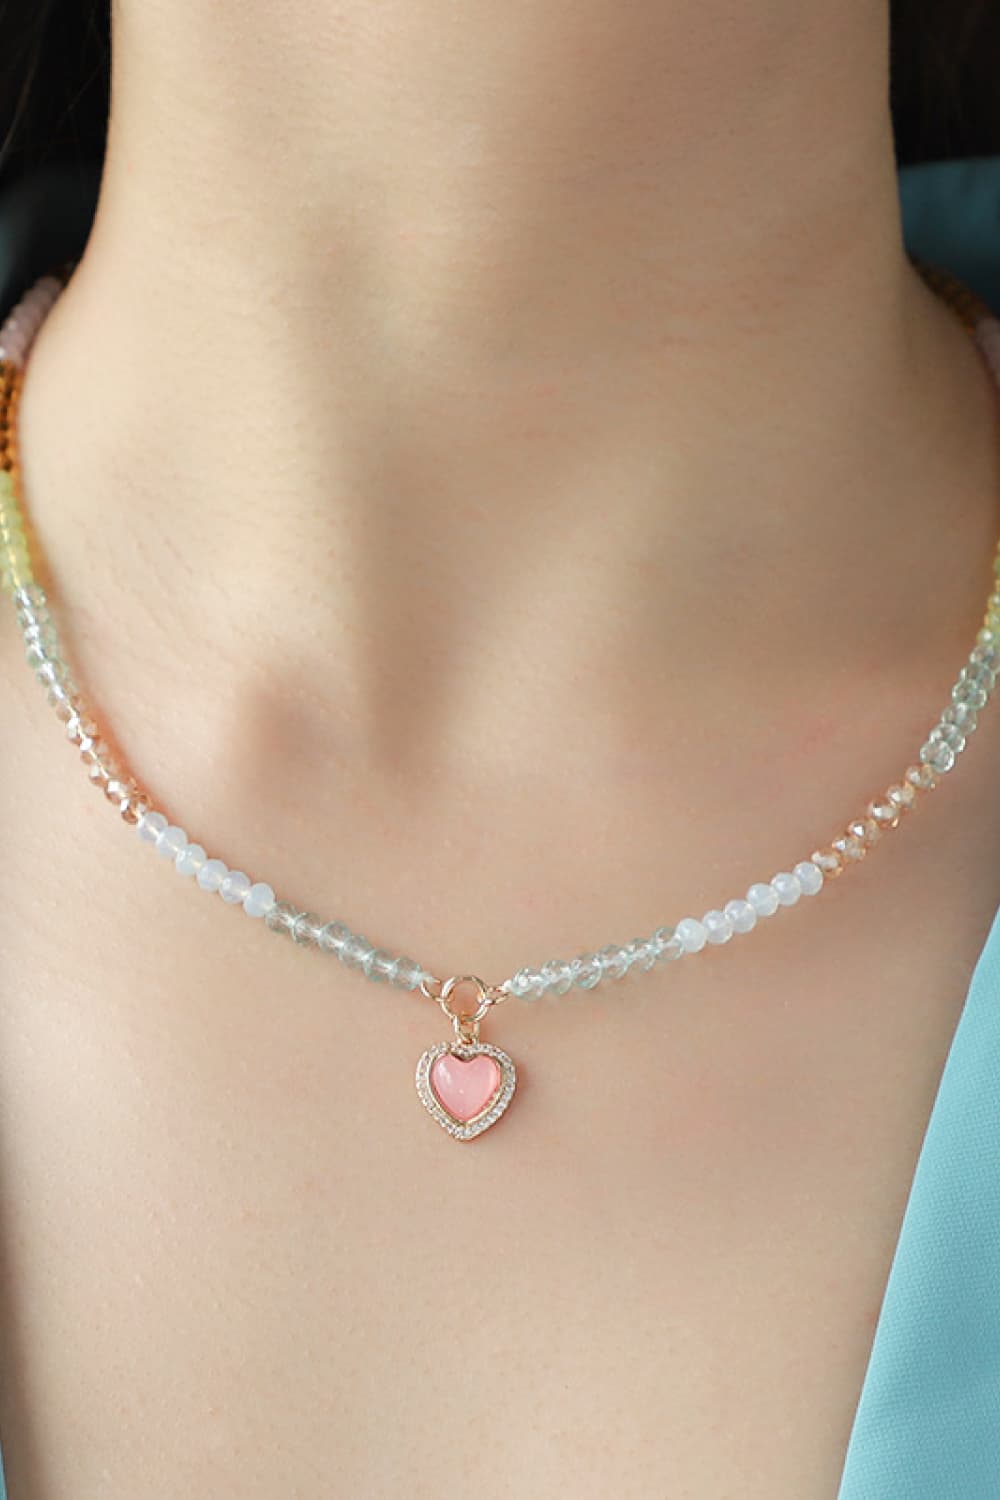 Heart Pendant Beaded Necklace - Fall in love with the stunning masterpiece that ignites a flame of passion within you - Wear it all day and cherish forever! - Guy Christopher